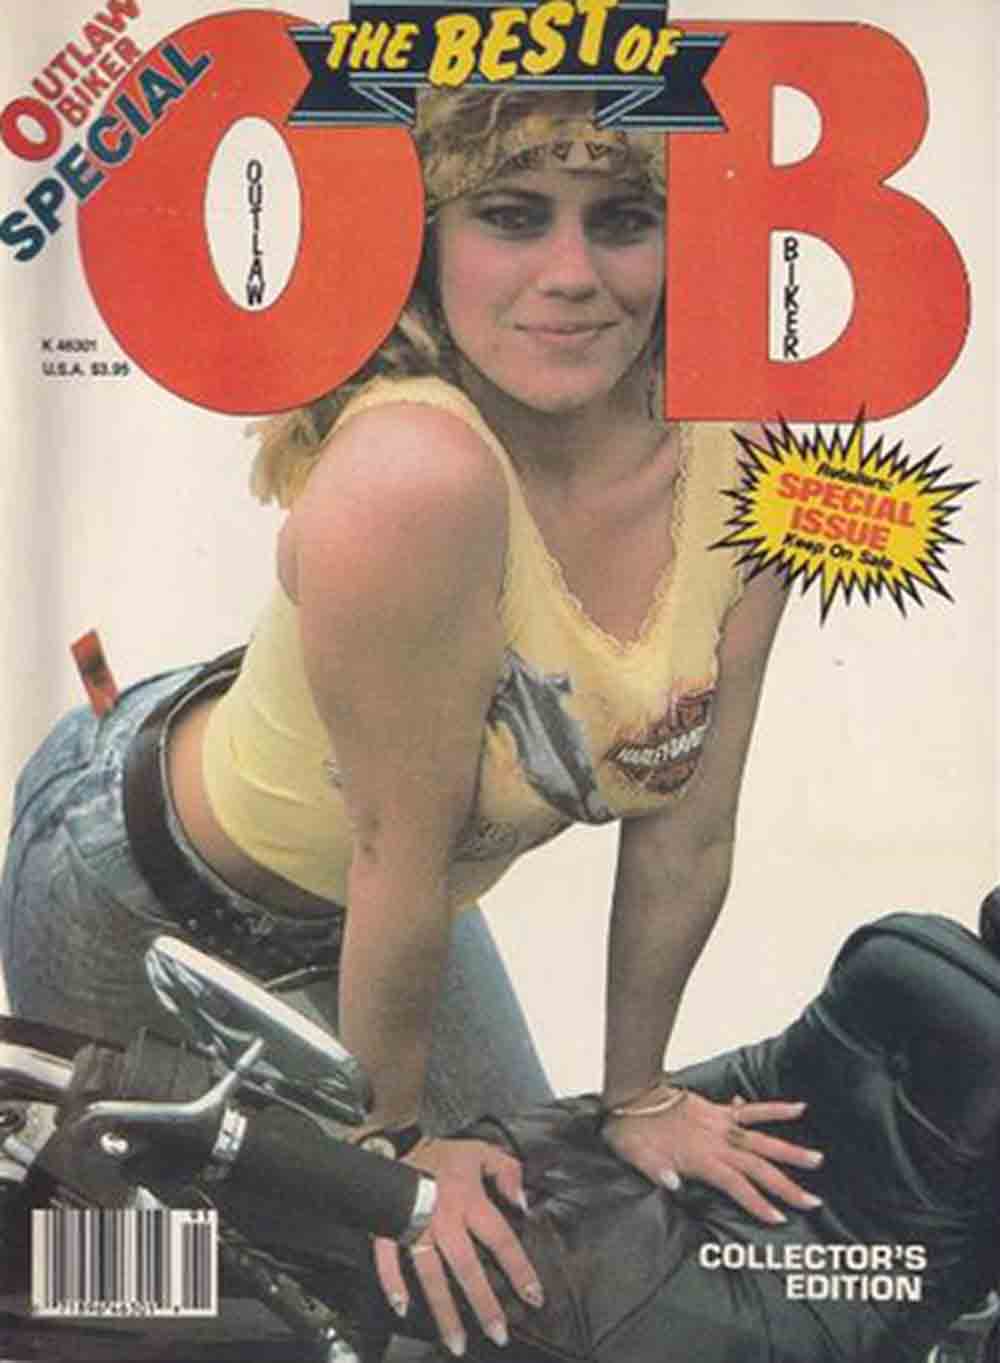 Outlaw Biker Spring 1989,Best Of magazine back issue Outlaw Biker magizine back copy Outlaw Biker Spring 1989,Best Of Magazine Back Issue for Bike Riding Rebels and Members of Outlaw Motorcycle Clubs. Retailers: Special Issue .